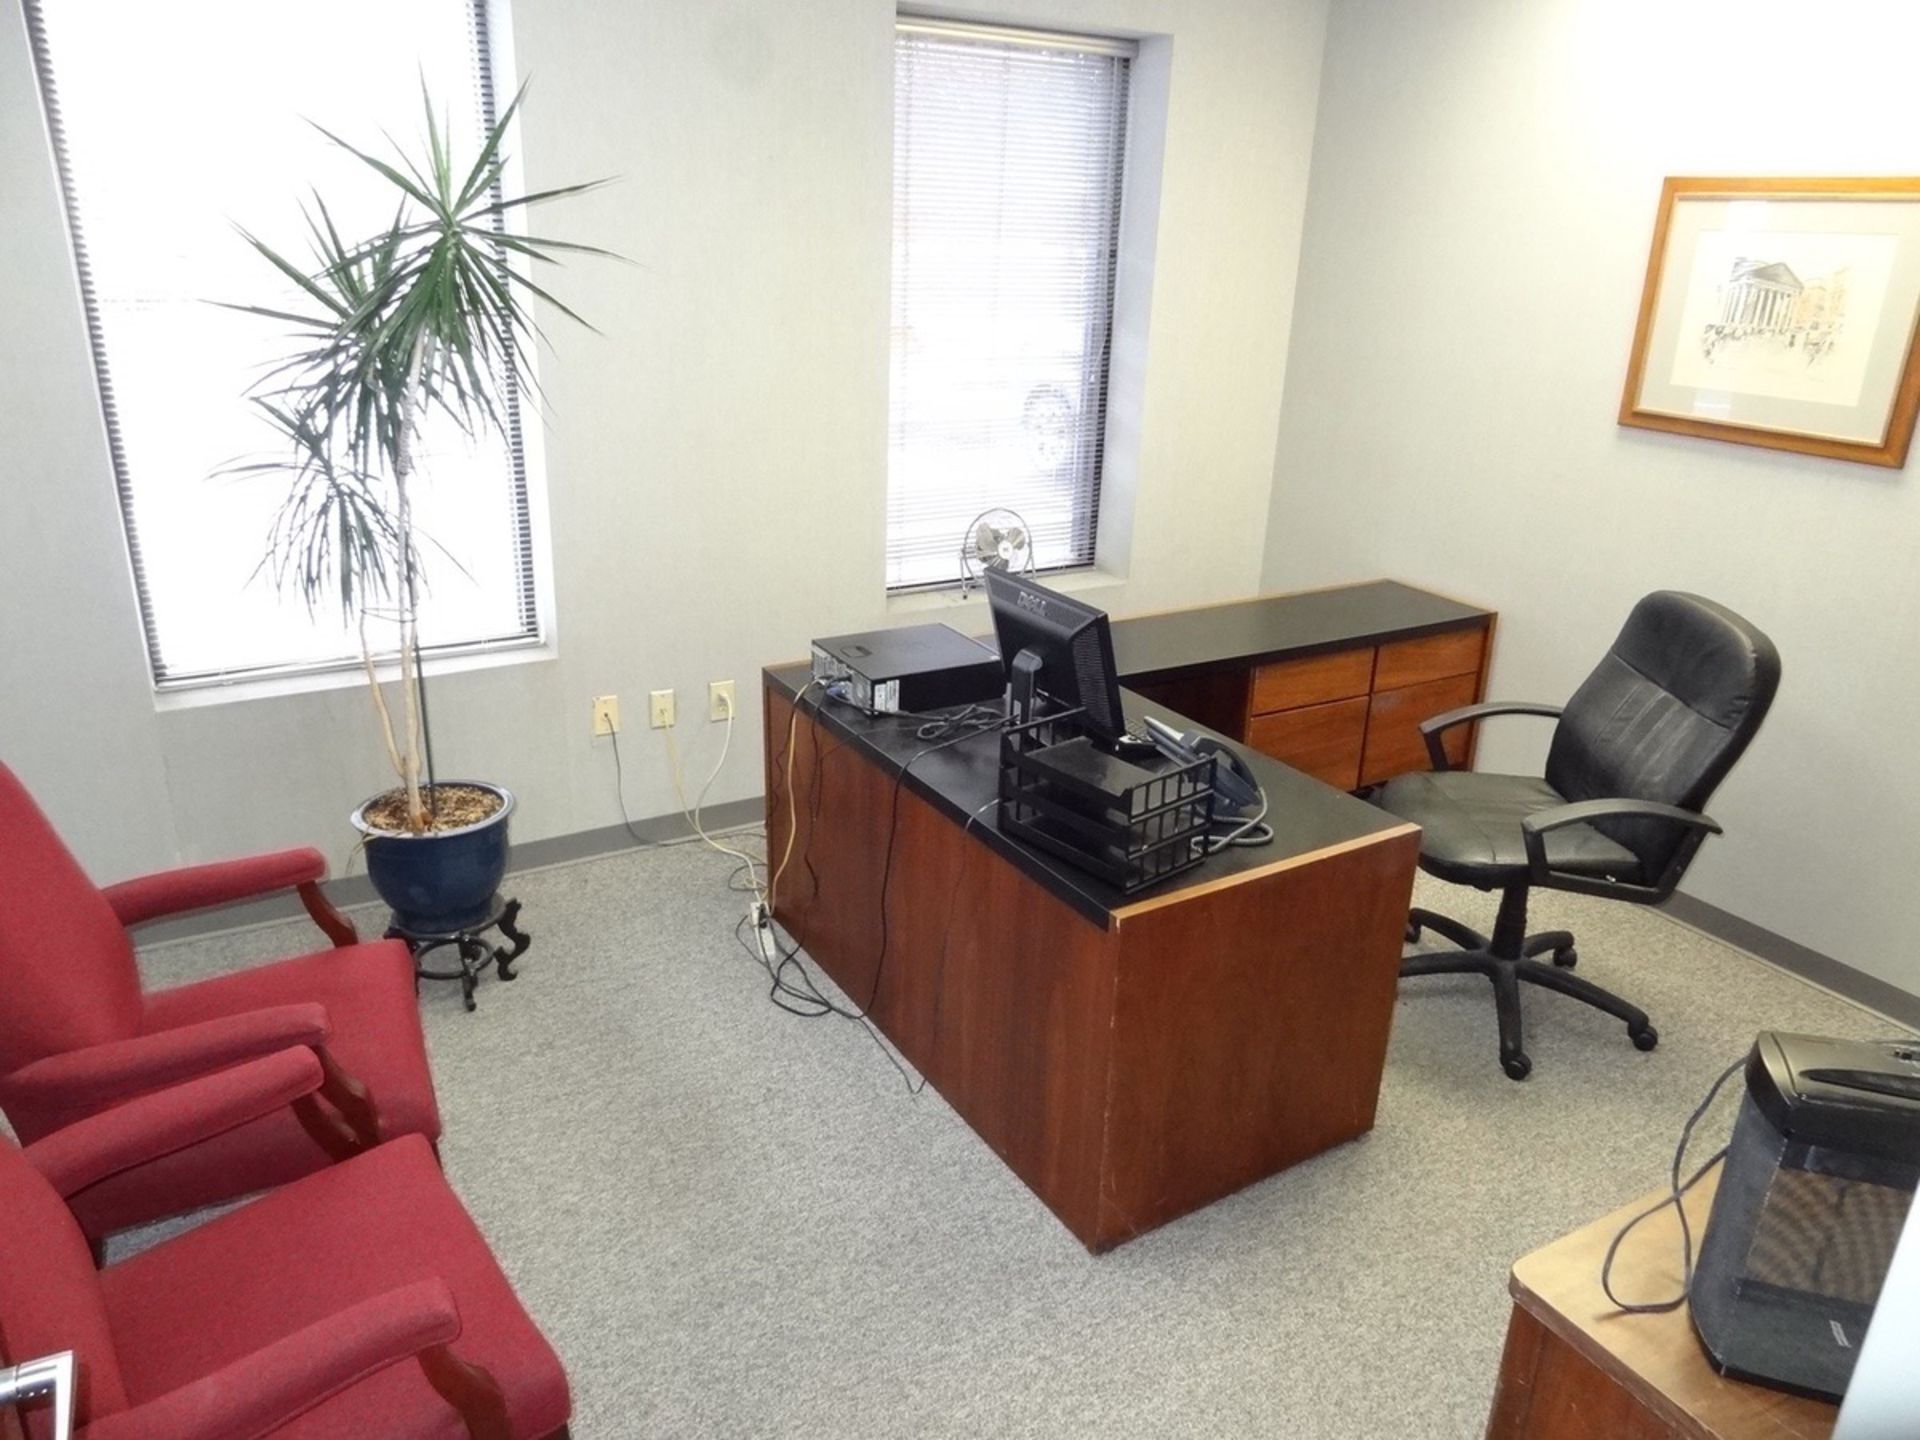 Office 3 - Desk, Chair, Low Side Credenza, 2 Chairs And Artwork | Rig Fee: See Full Desc